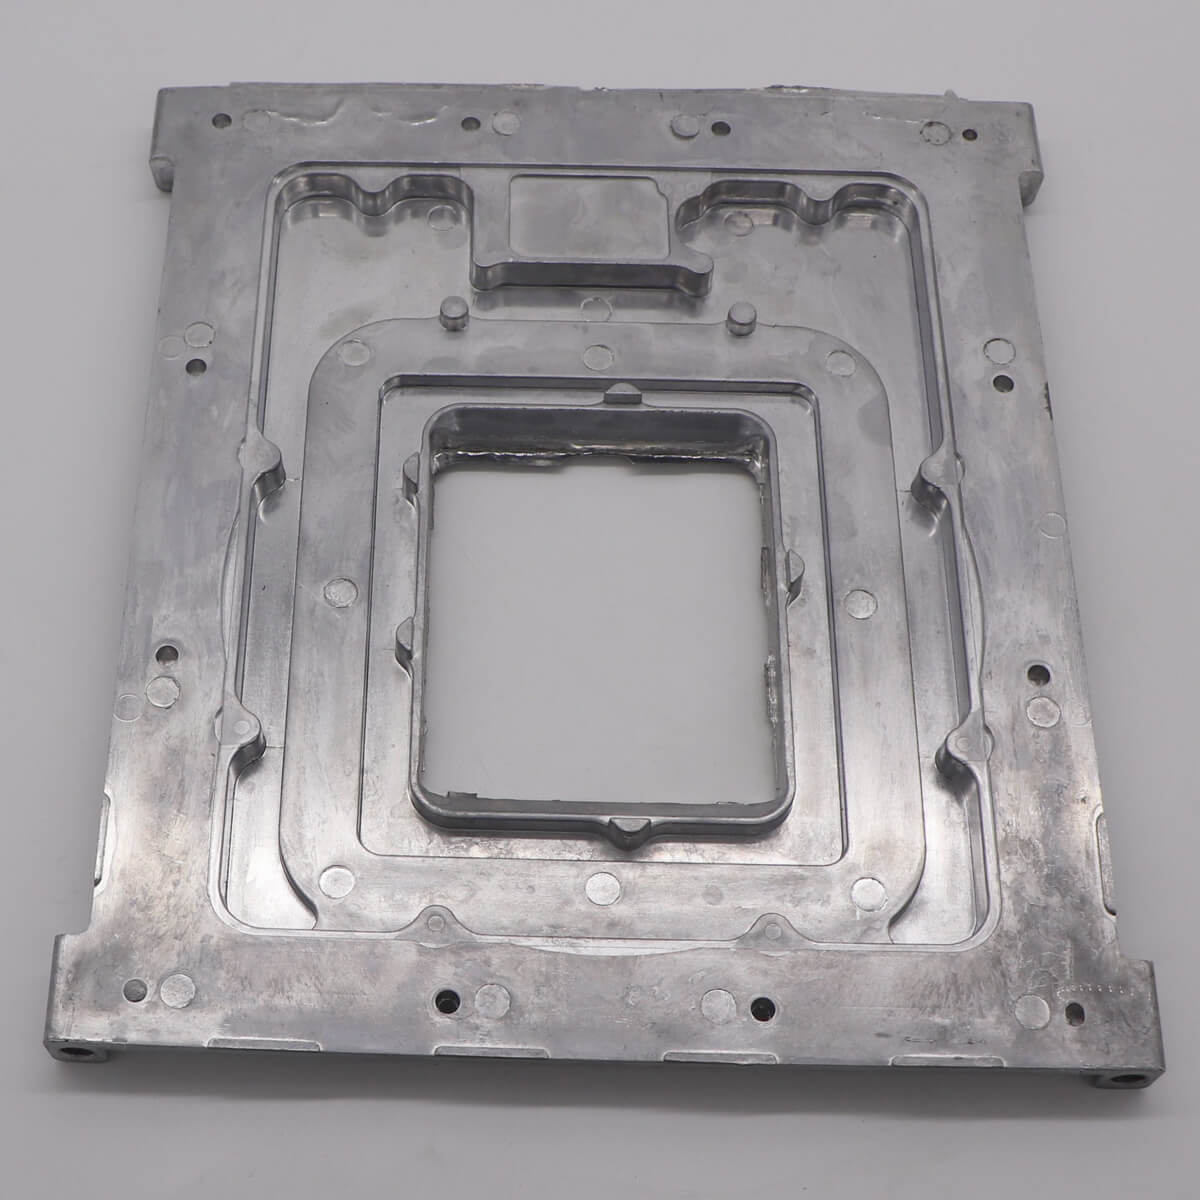 Xavier high-quality materials custom cnc milling aluminum alloy free delivery